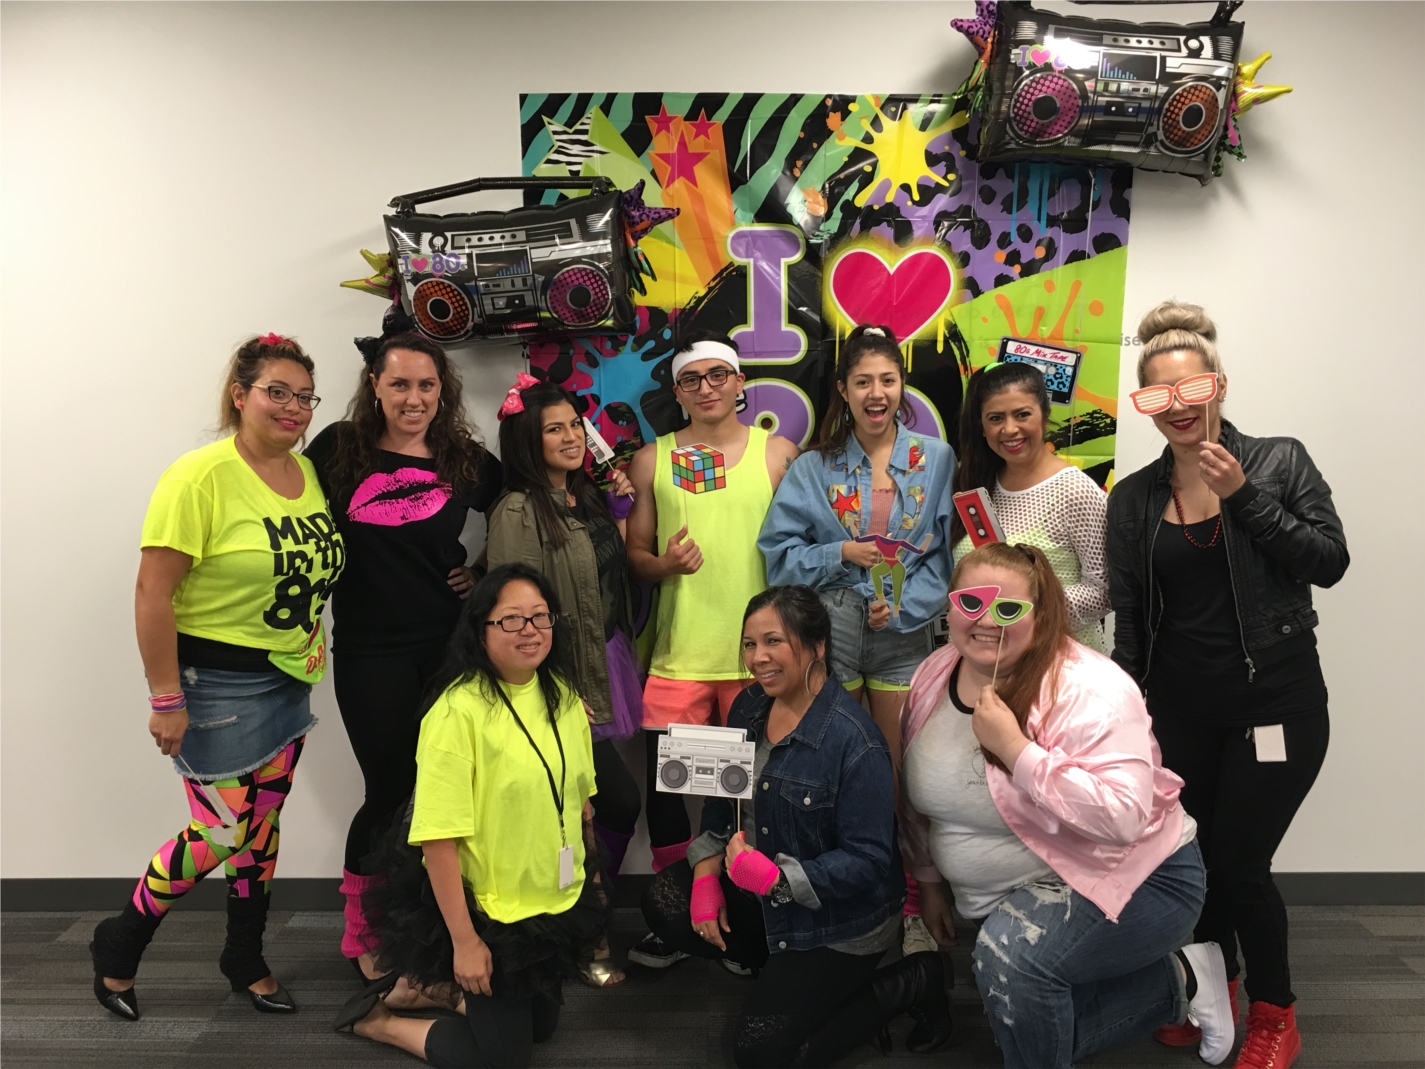 One of our themed parties throughout the year. This 80's party was to celebrate Lorena's, our AVP of Operations, birthday.